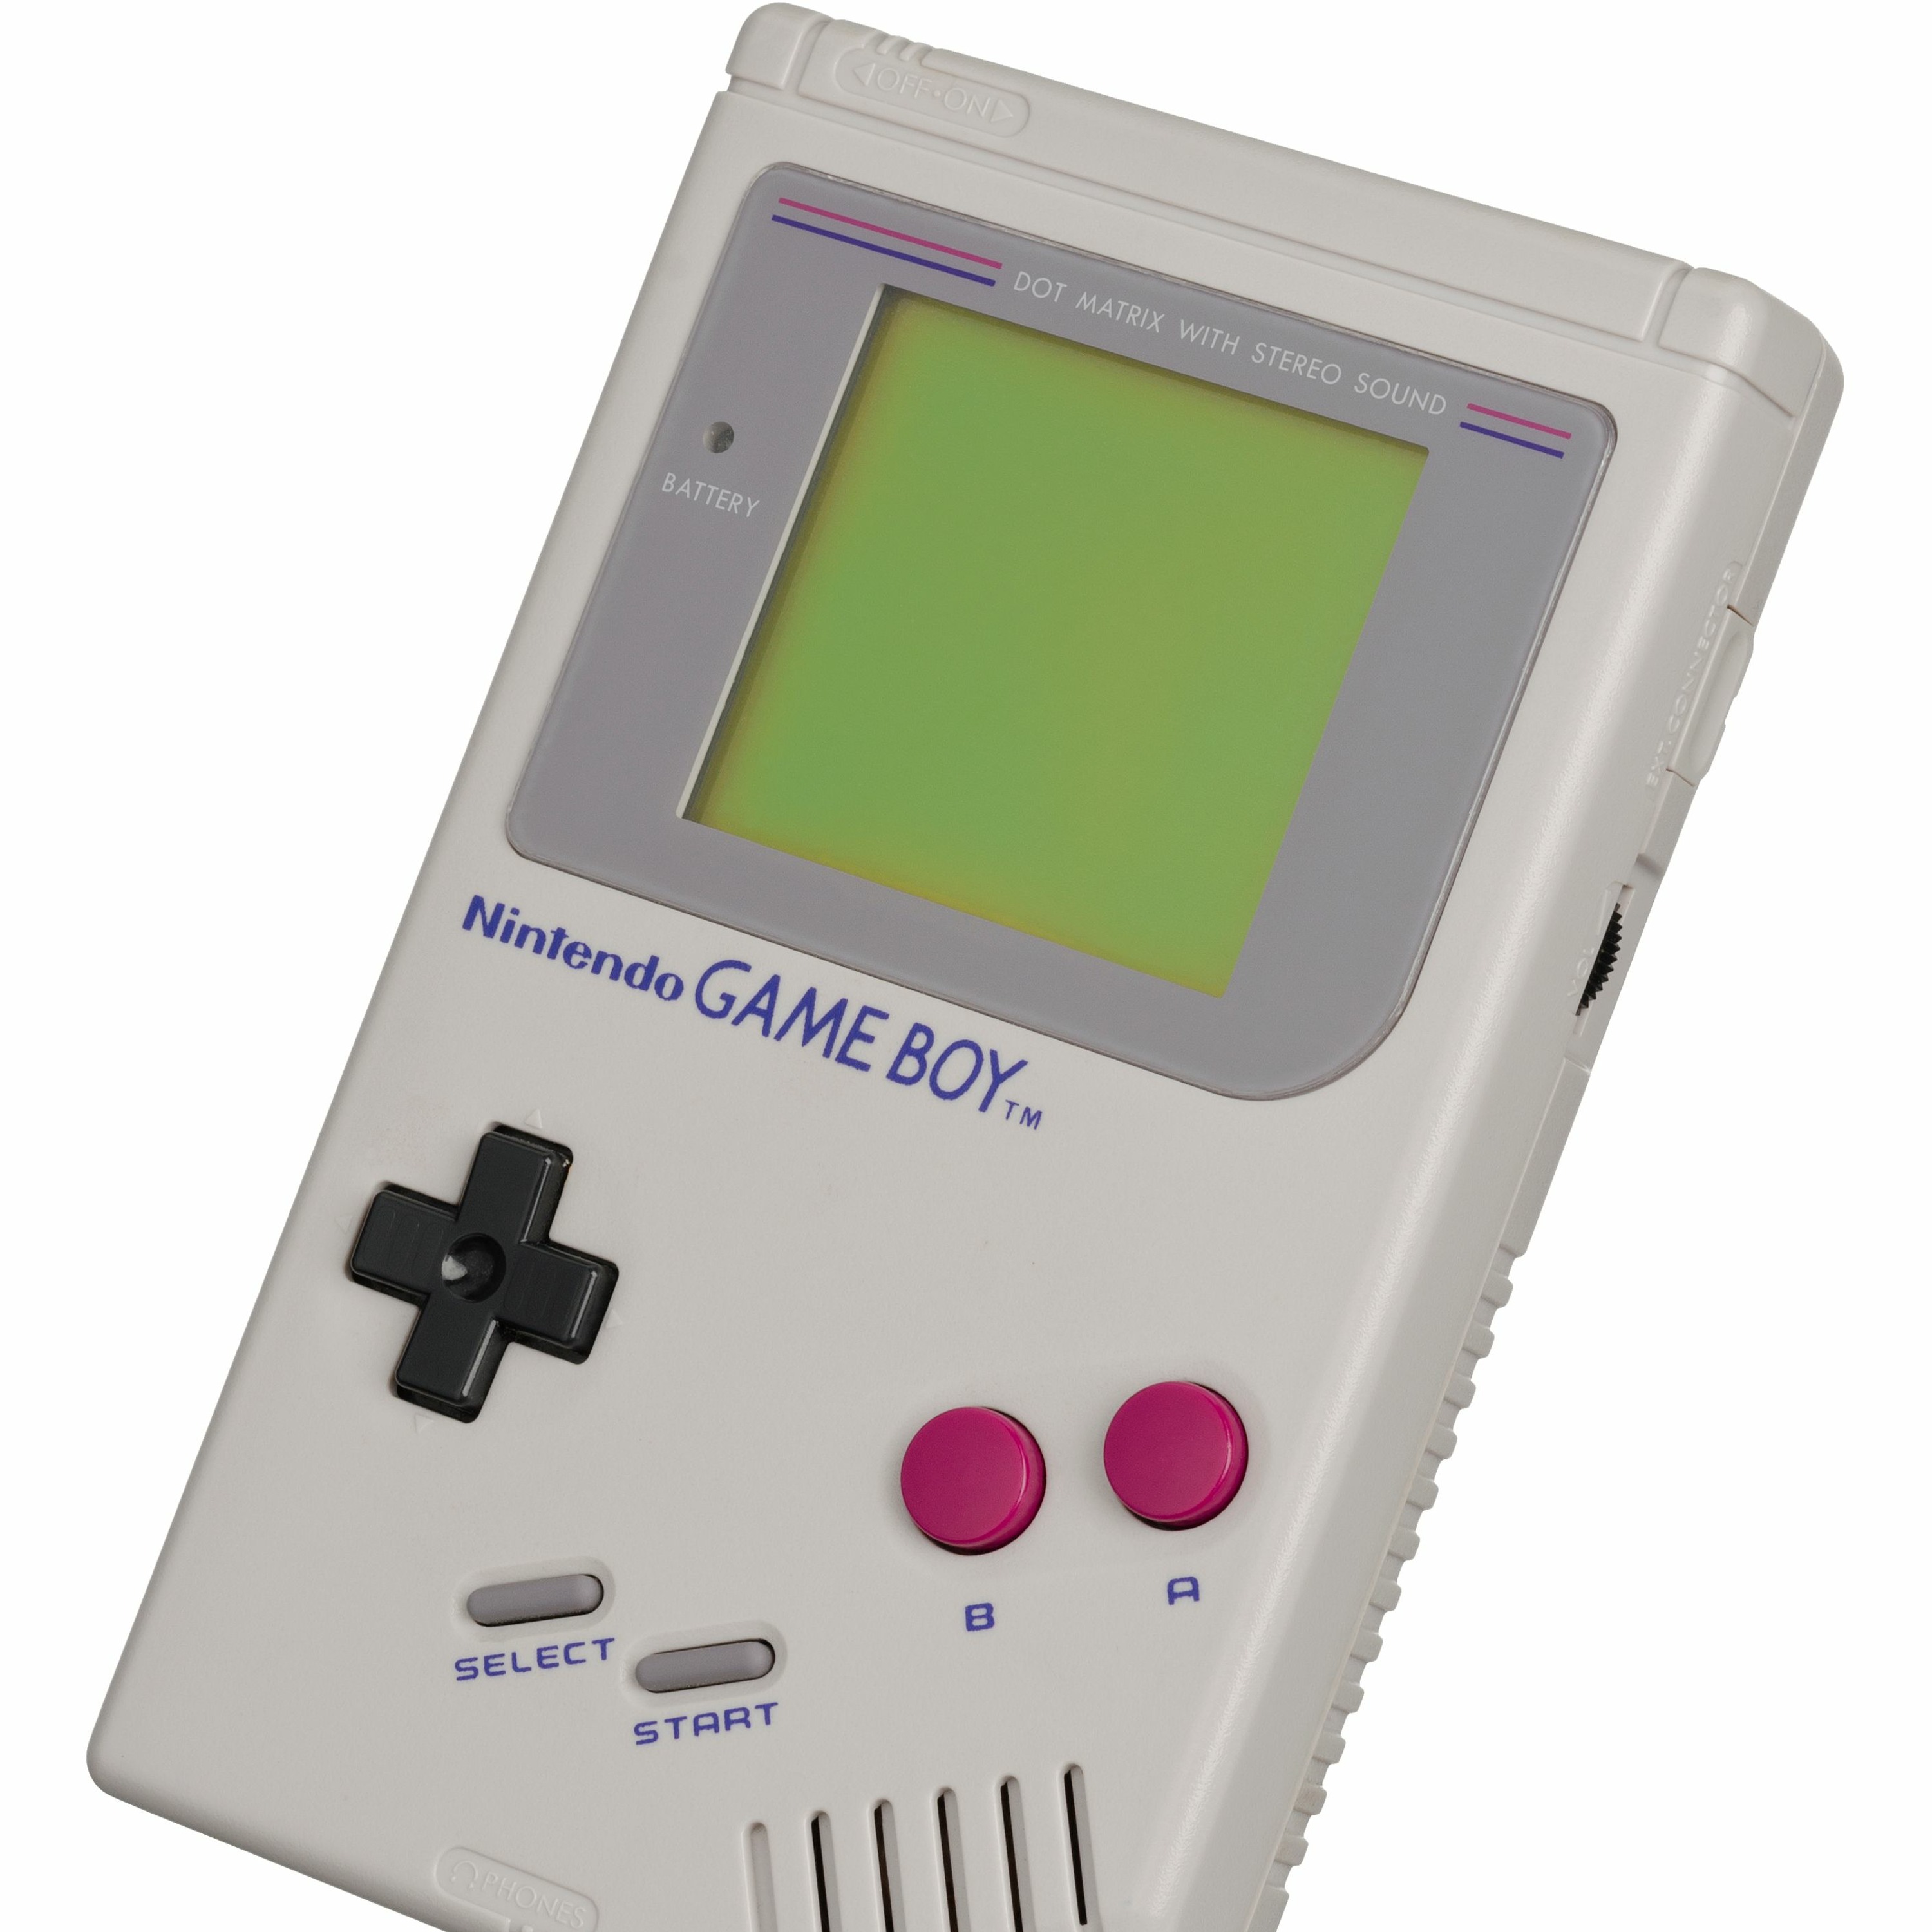 Episode 11: The Game Boy and Game Boy Color